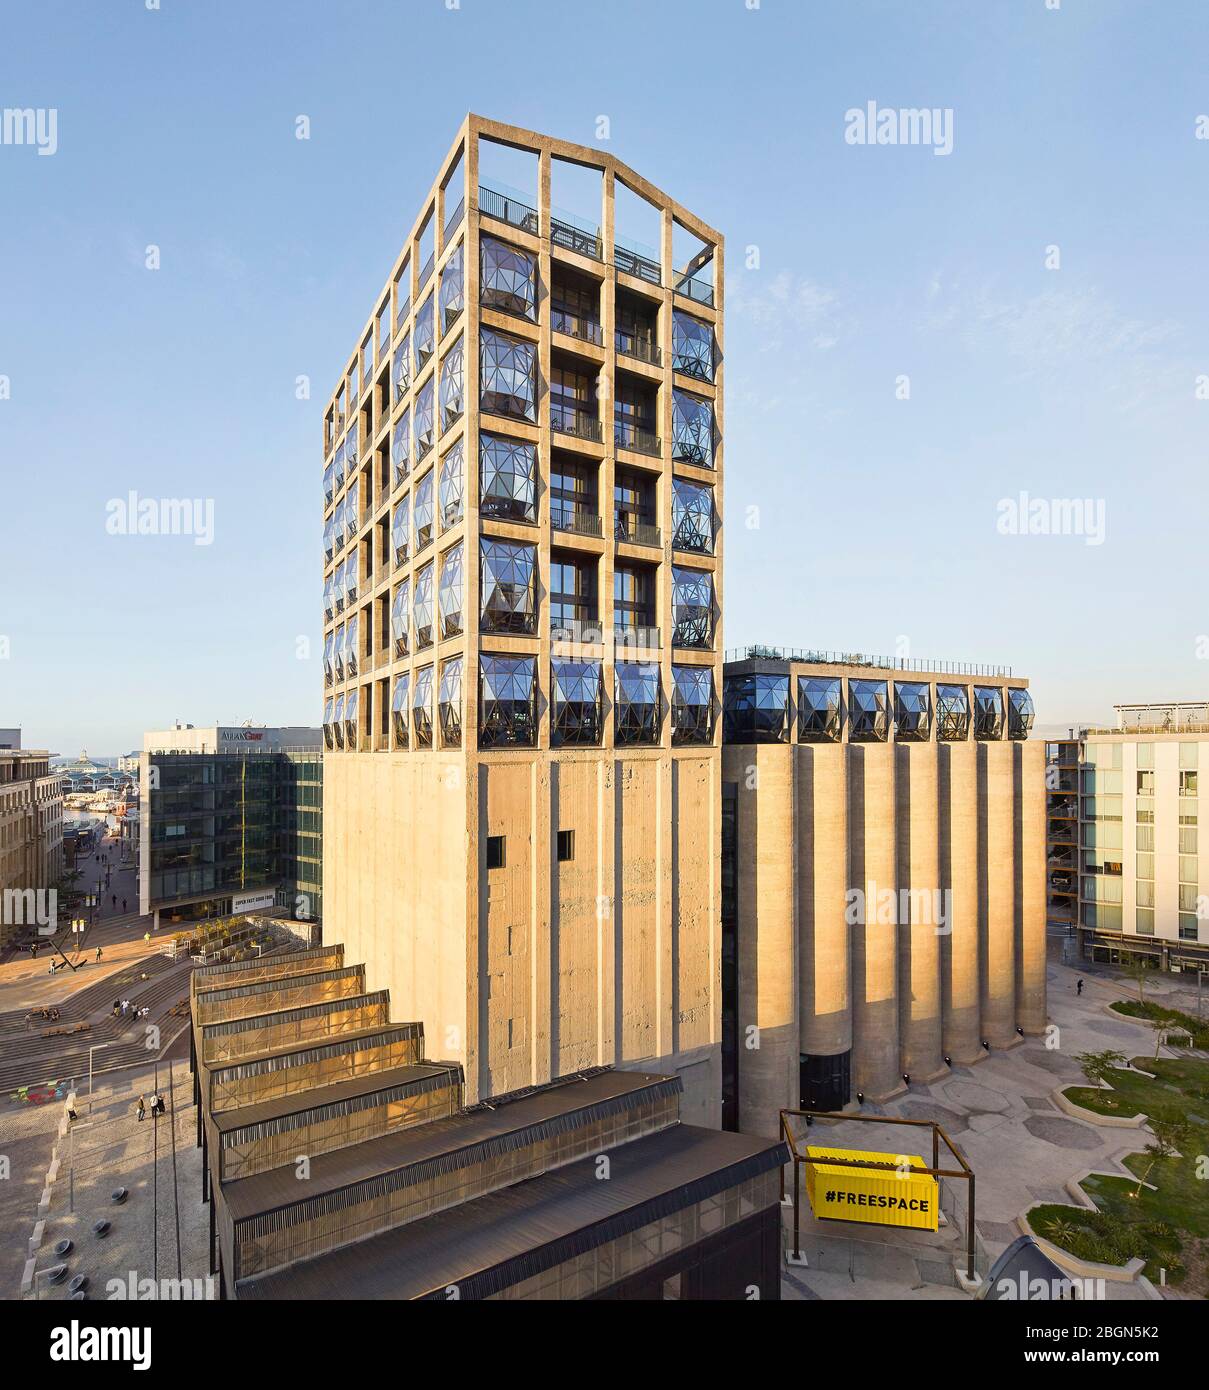 Exterior facade with elevated view of canopied Track Shed forecourt. Zeitz MOCAA, Cape Town, South Africa. Architect: Heatherwick Studio, 2017. Stock Photo